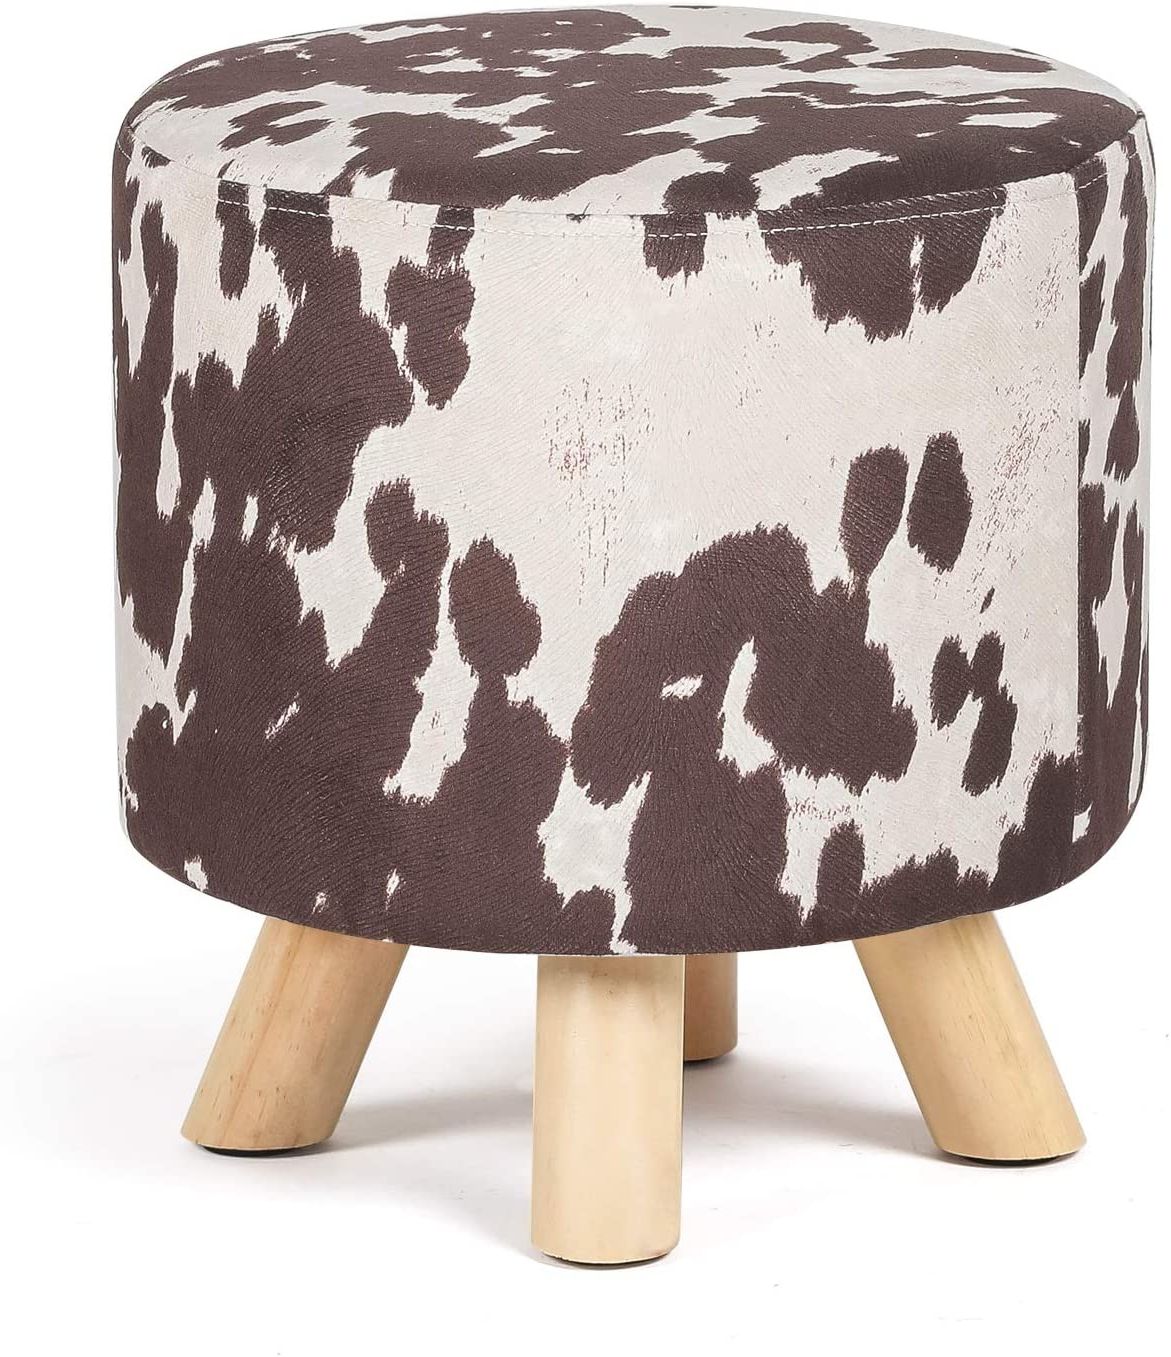 Homebeez Velvet Round Ottoman Foot Rest Stool (brown Cow) – Walmart For Newest Warm Brown Cowhide Pouf Ottomans (View 8 of 10)